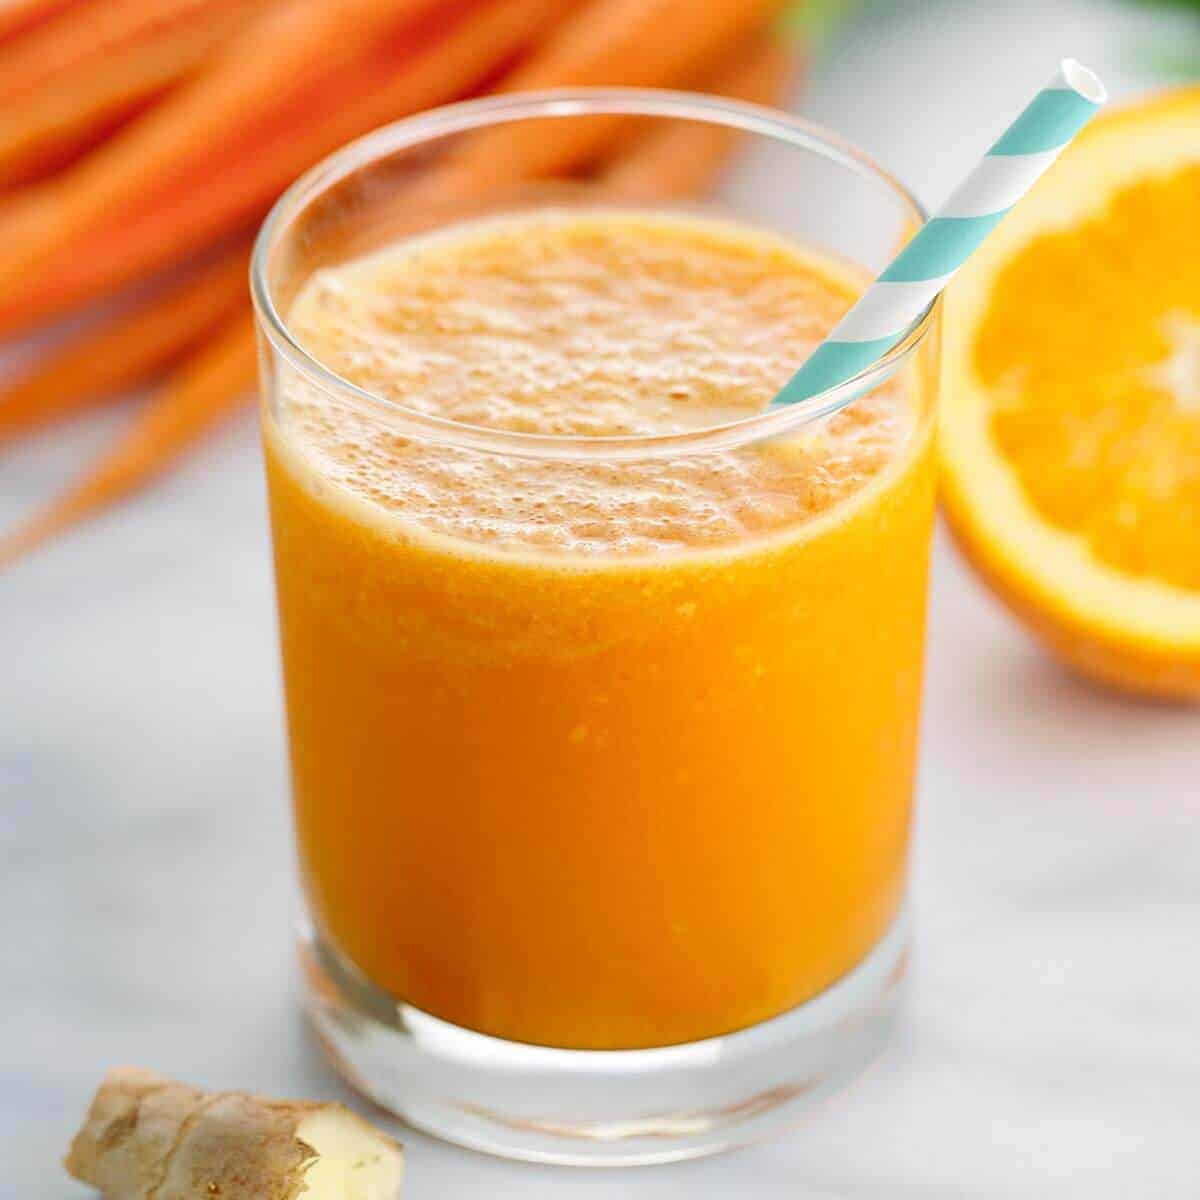 “15 Ginger Smoothie Recipes for a Refreshing Boost of Flavor and Health”